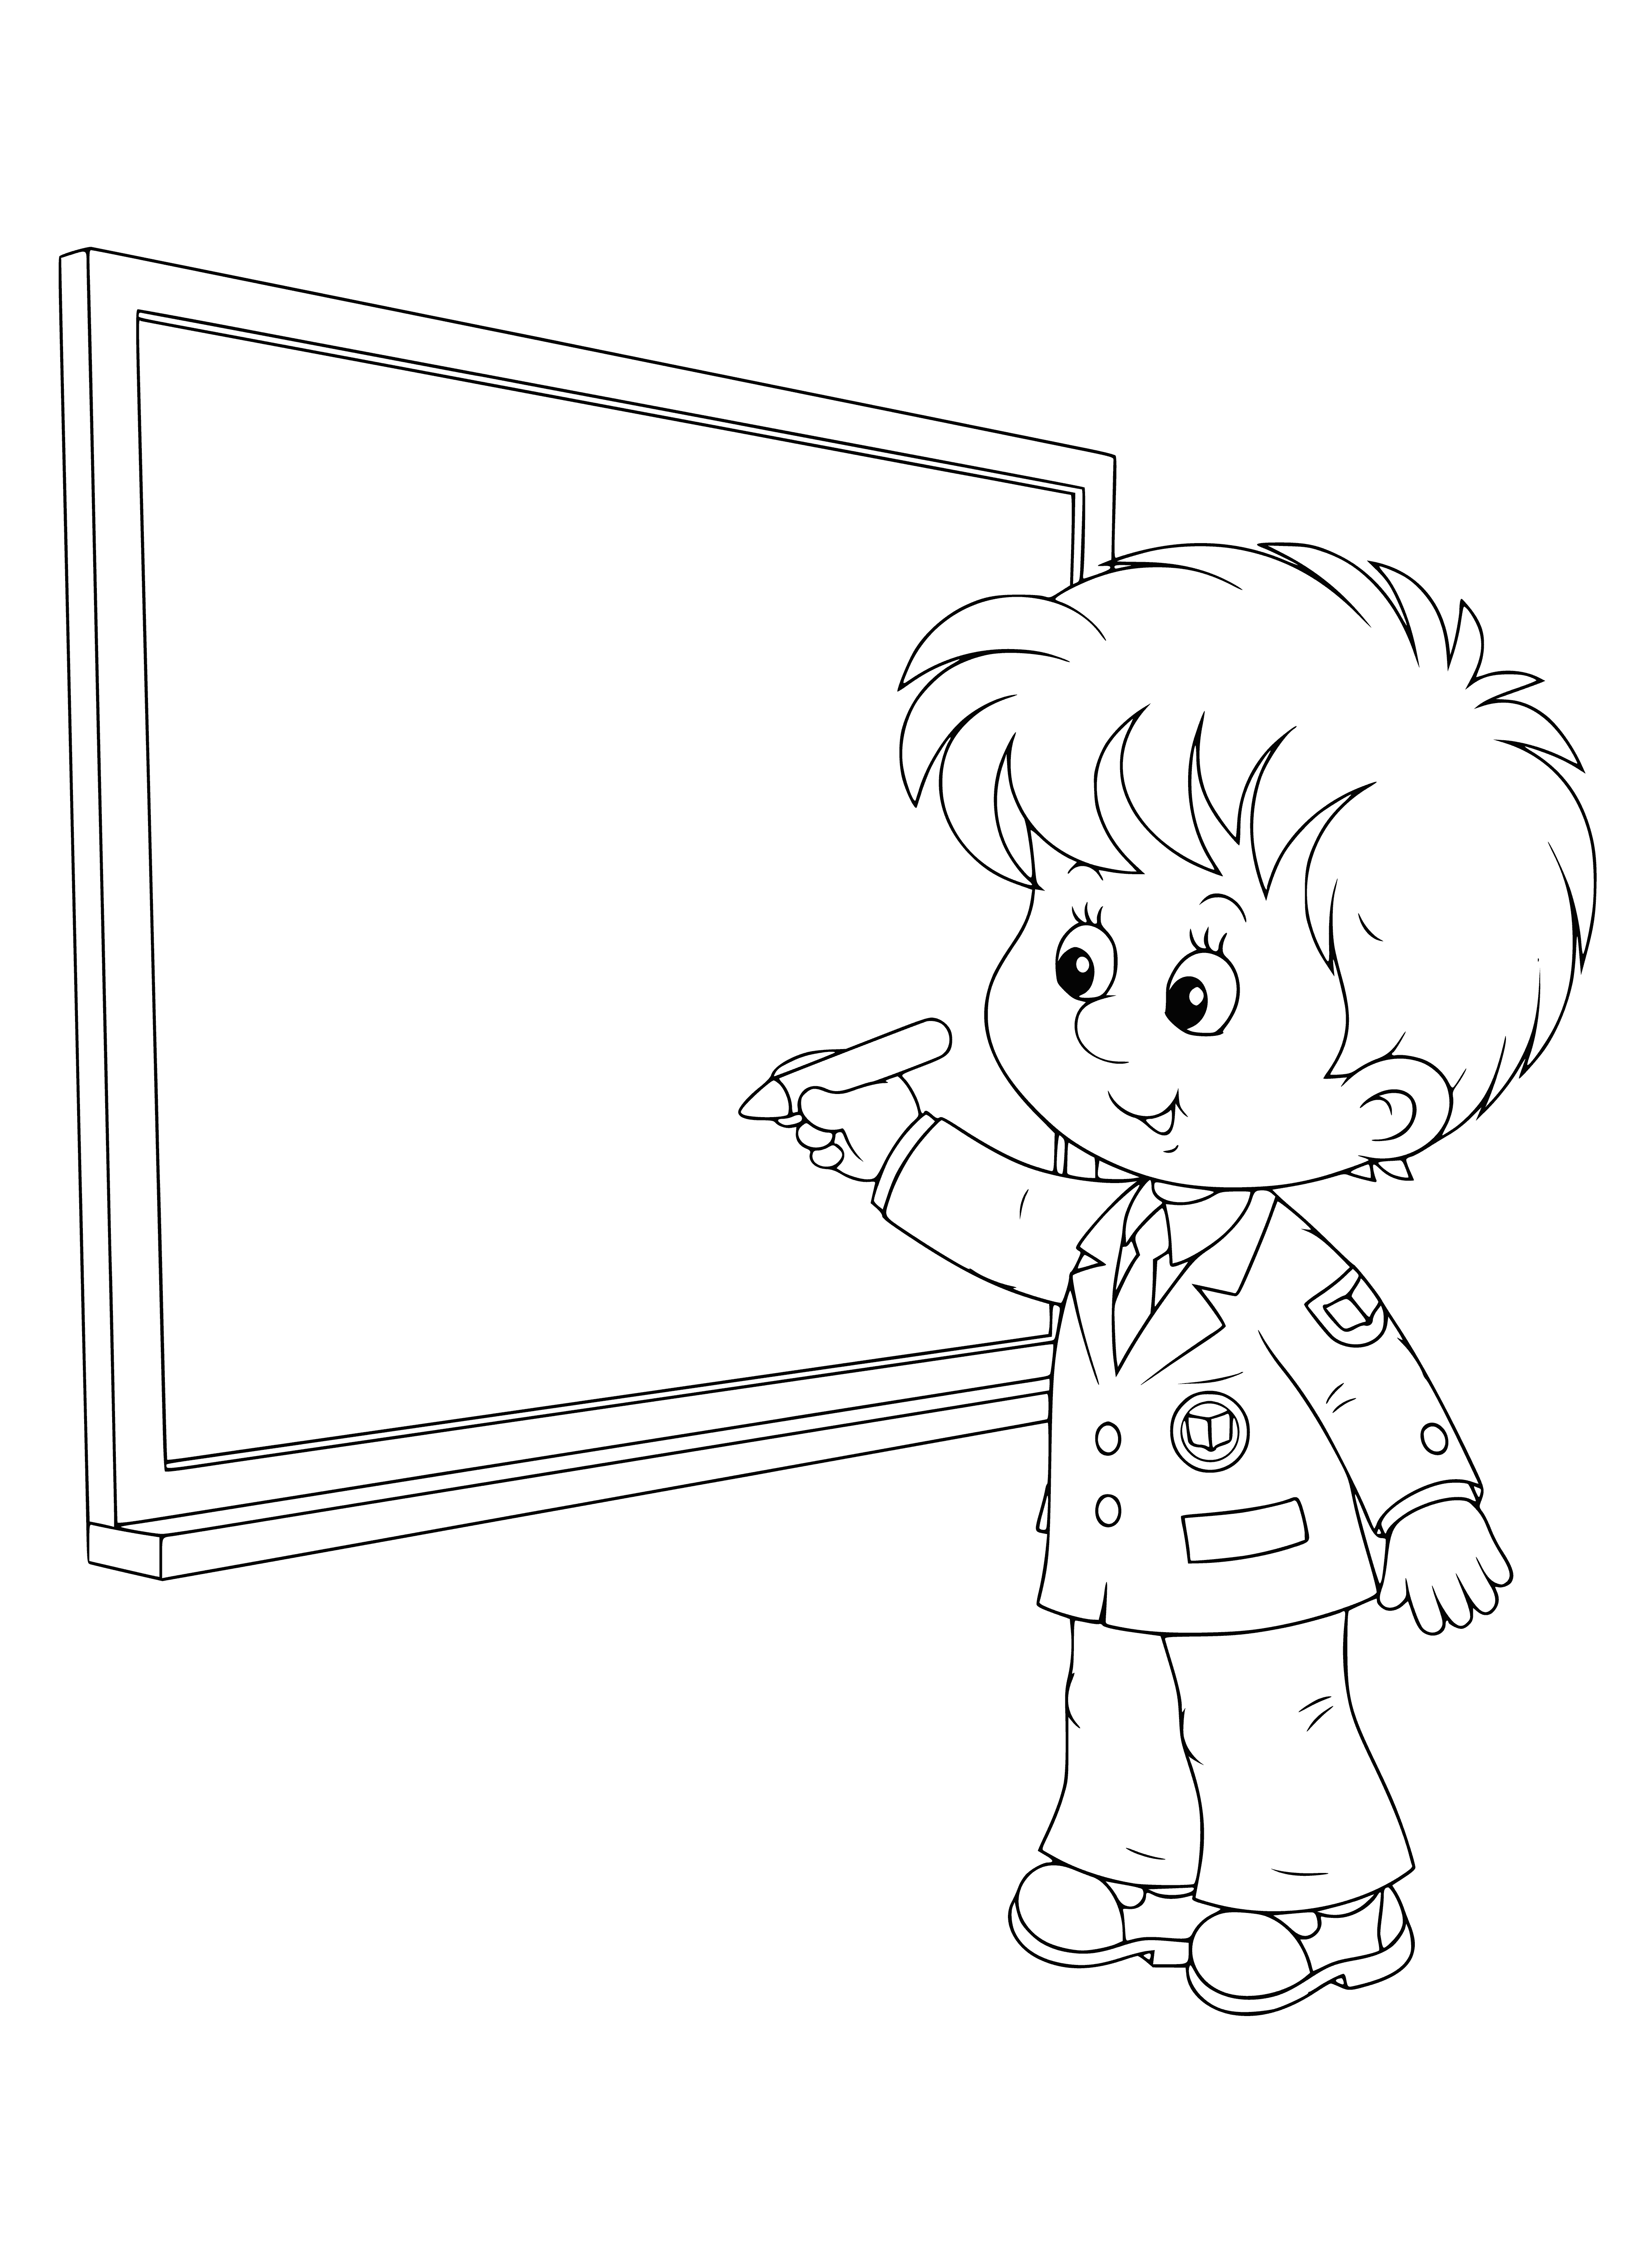 coloring page: Boy in school uniform w/ backpack & chalk in hand at blackboard, ready to answer a question.